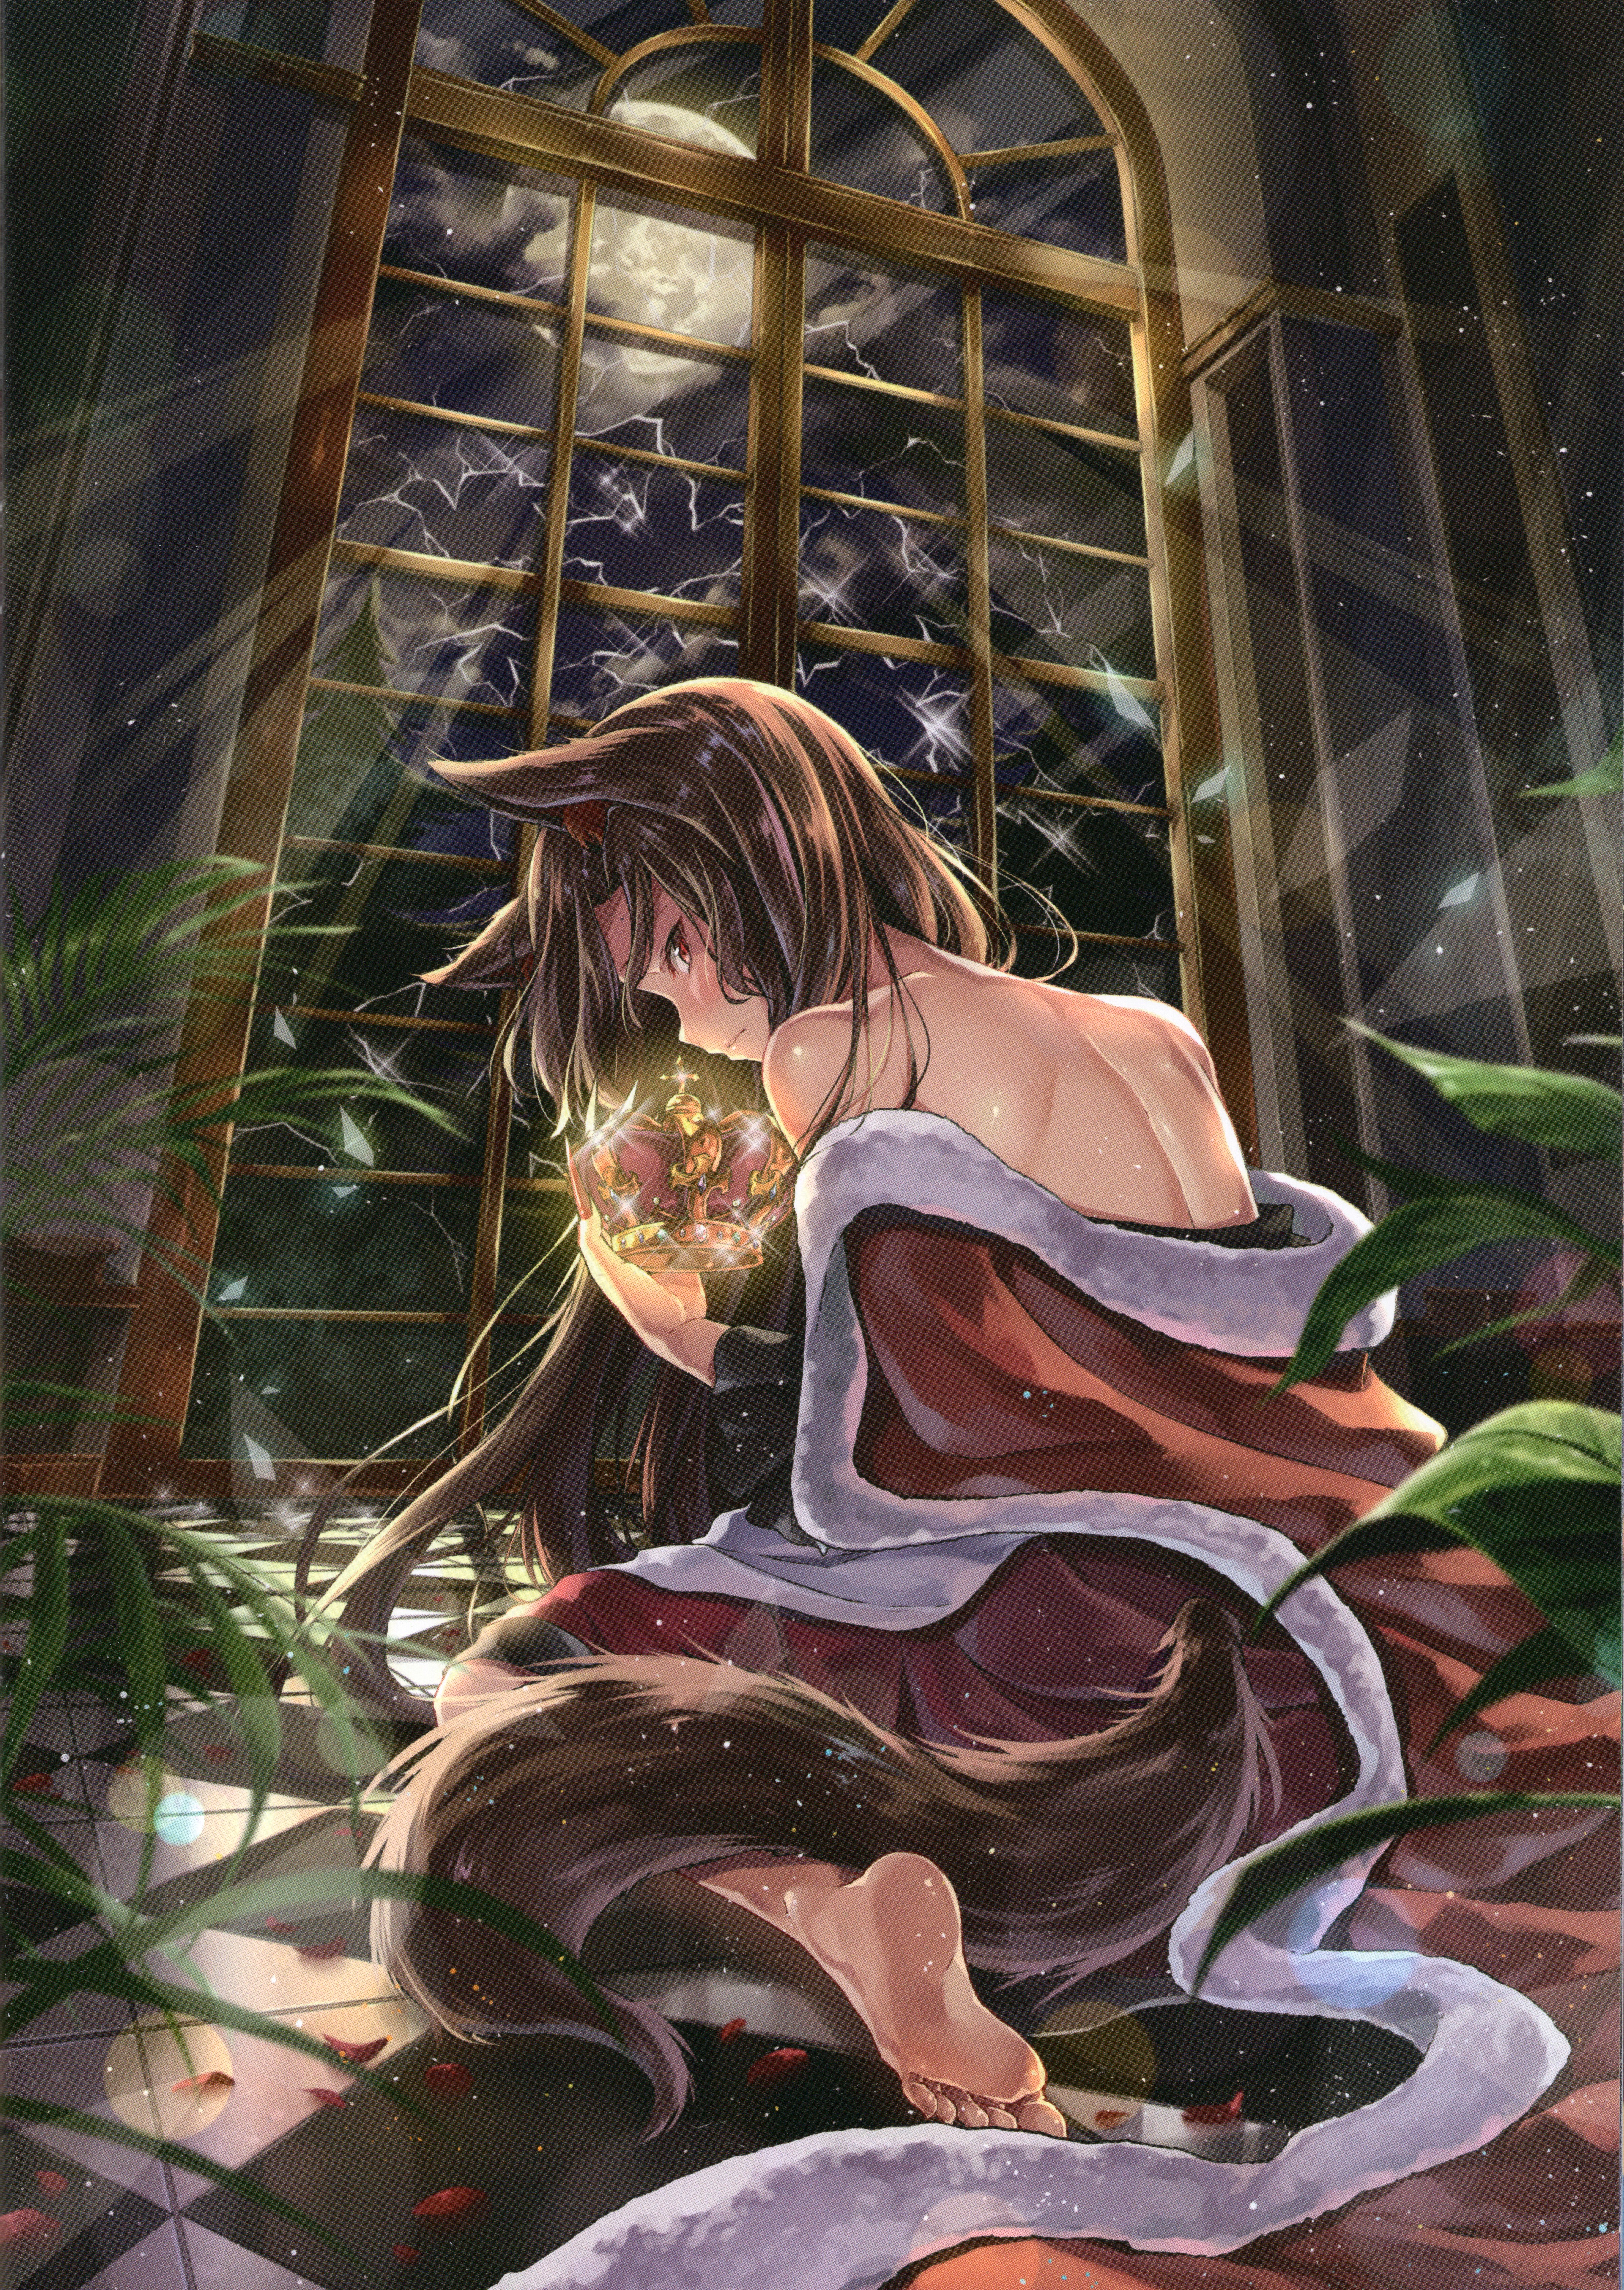 Anime 4269x6019 Kakao Rantan wolf girls anime girls bareback portrait display window Imaizumi Kagerou back looking back plants looking at viewer night animal ears broken glass barefoot foot sole long hair brunette red eyes full moon Moon crown glass particle bare shoulders tail fox tail petals wolf ears leaves starry night starred sky sky blushing profile moonlight feet